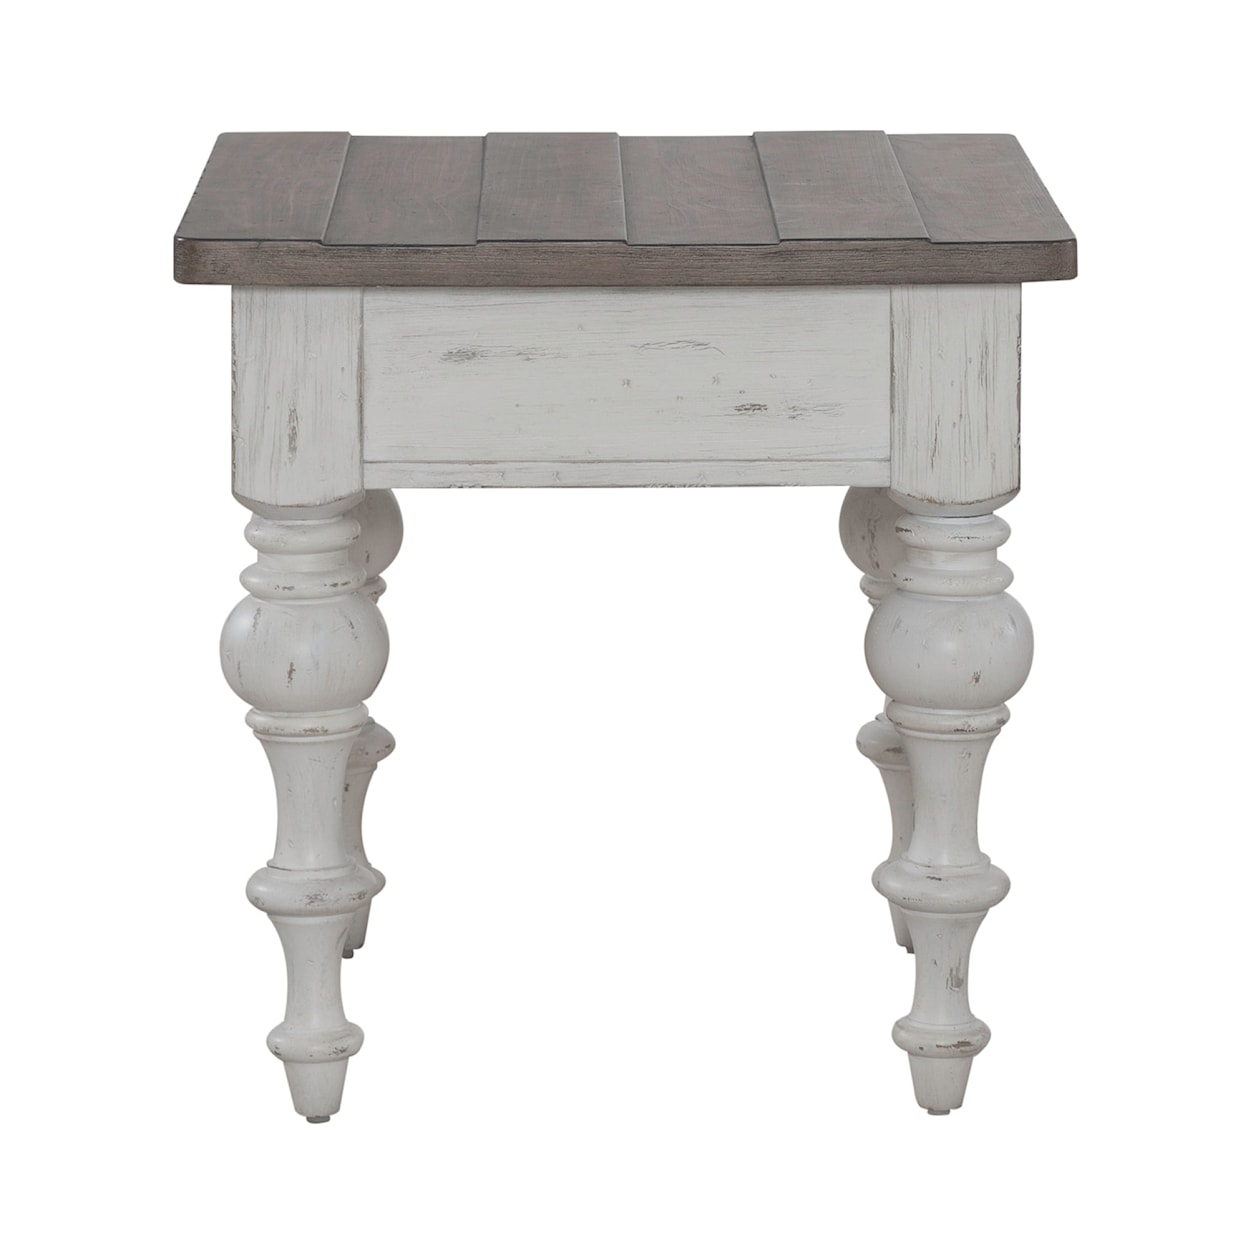 Libby River Place End Table